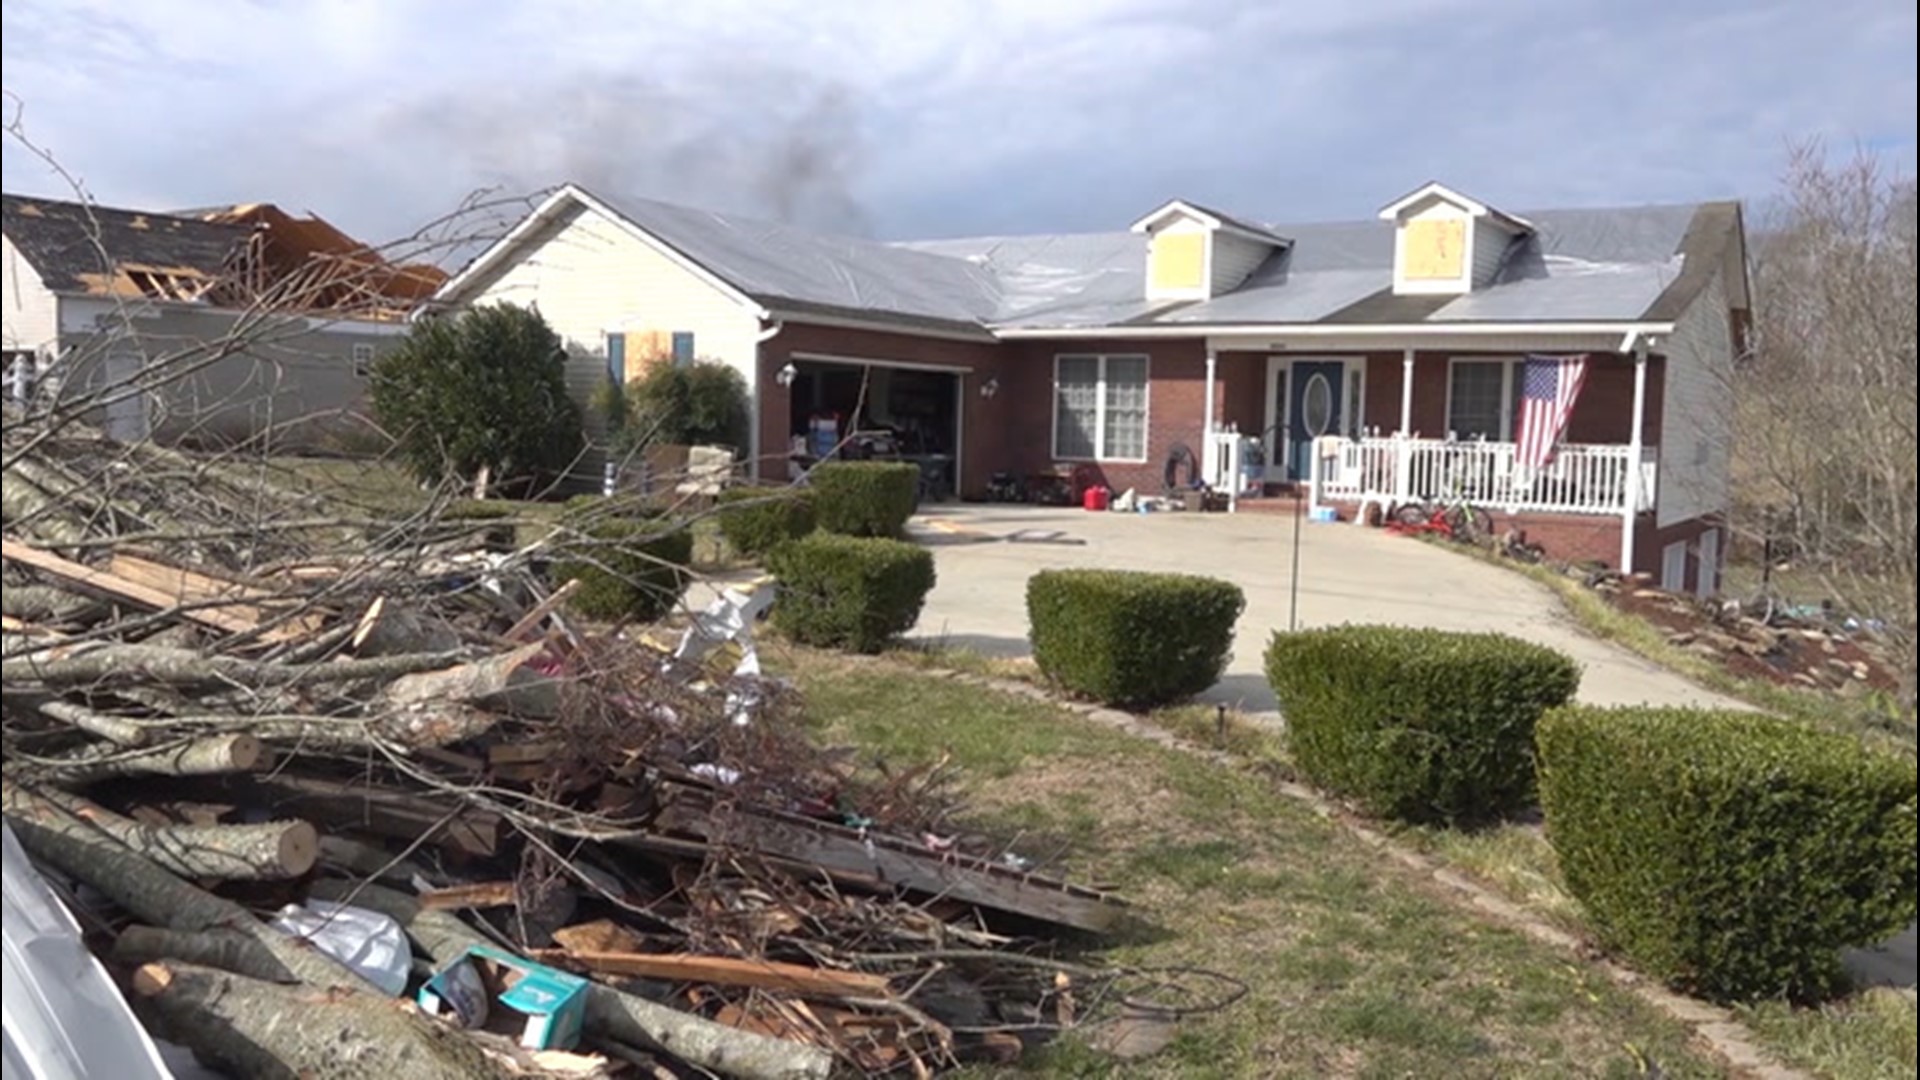 A nurse who helped her injured neighbors after a violent tornado in Tennessee last March said the families are much closer while working to rebuild their homes.